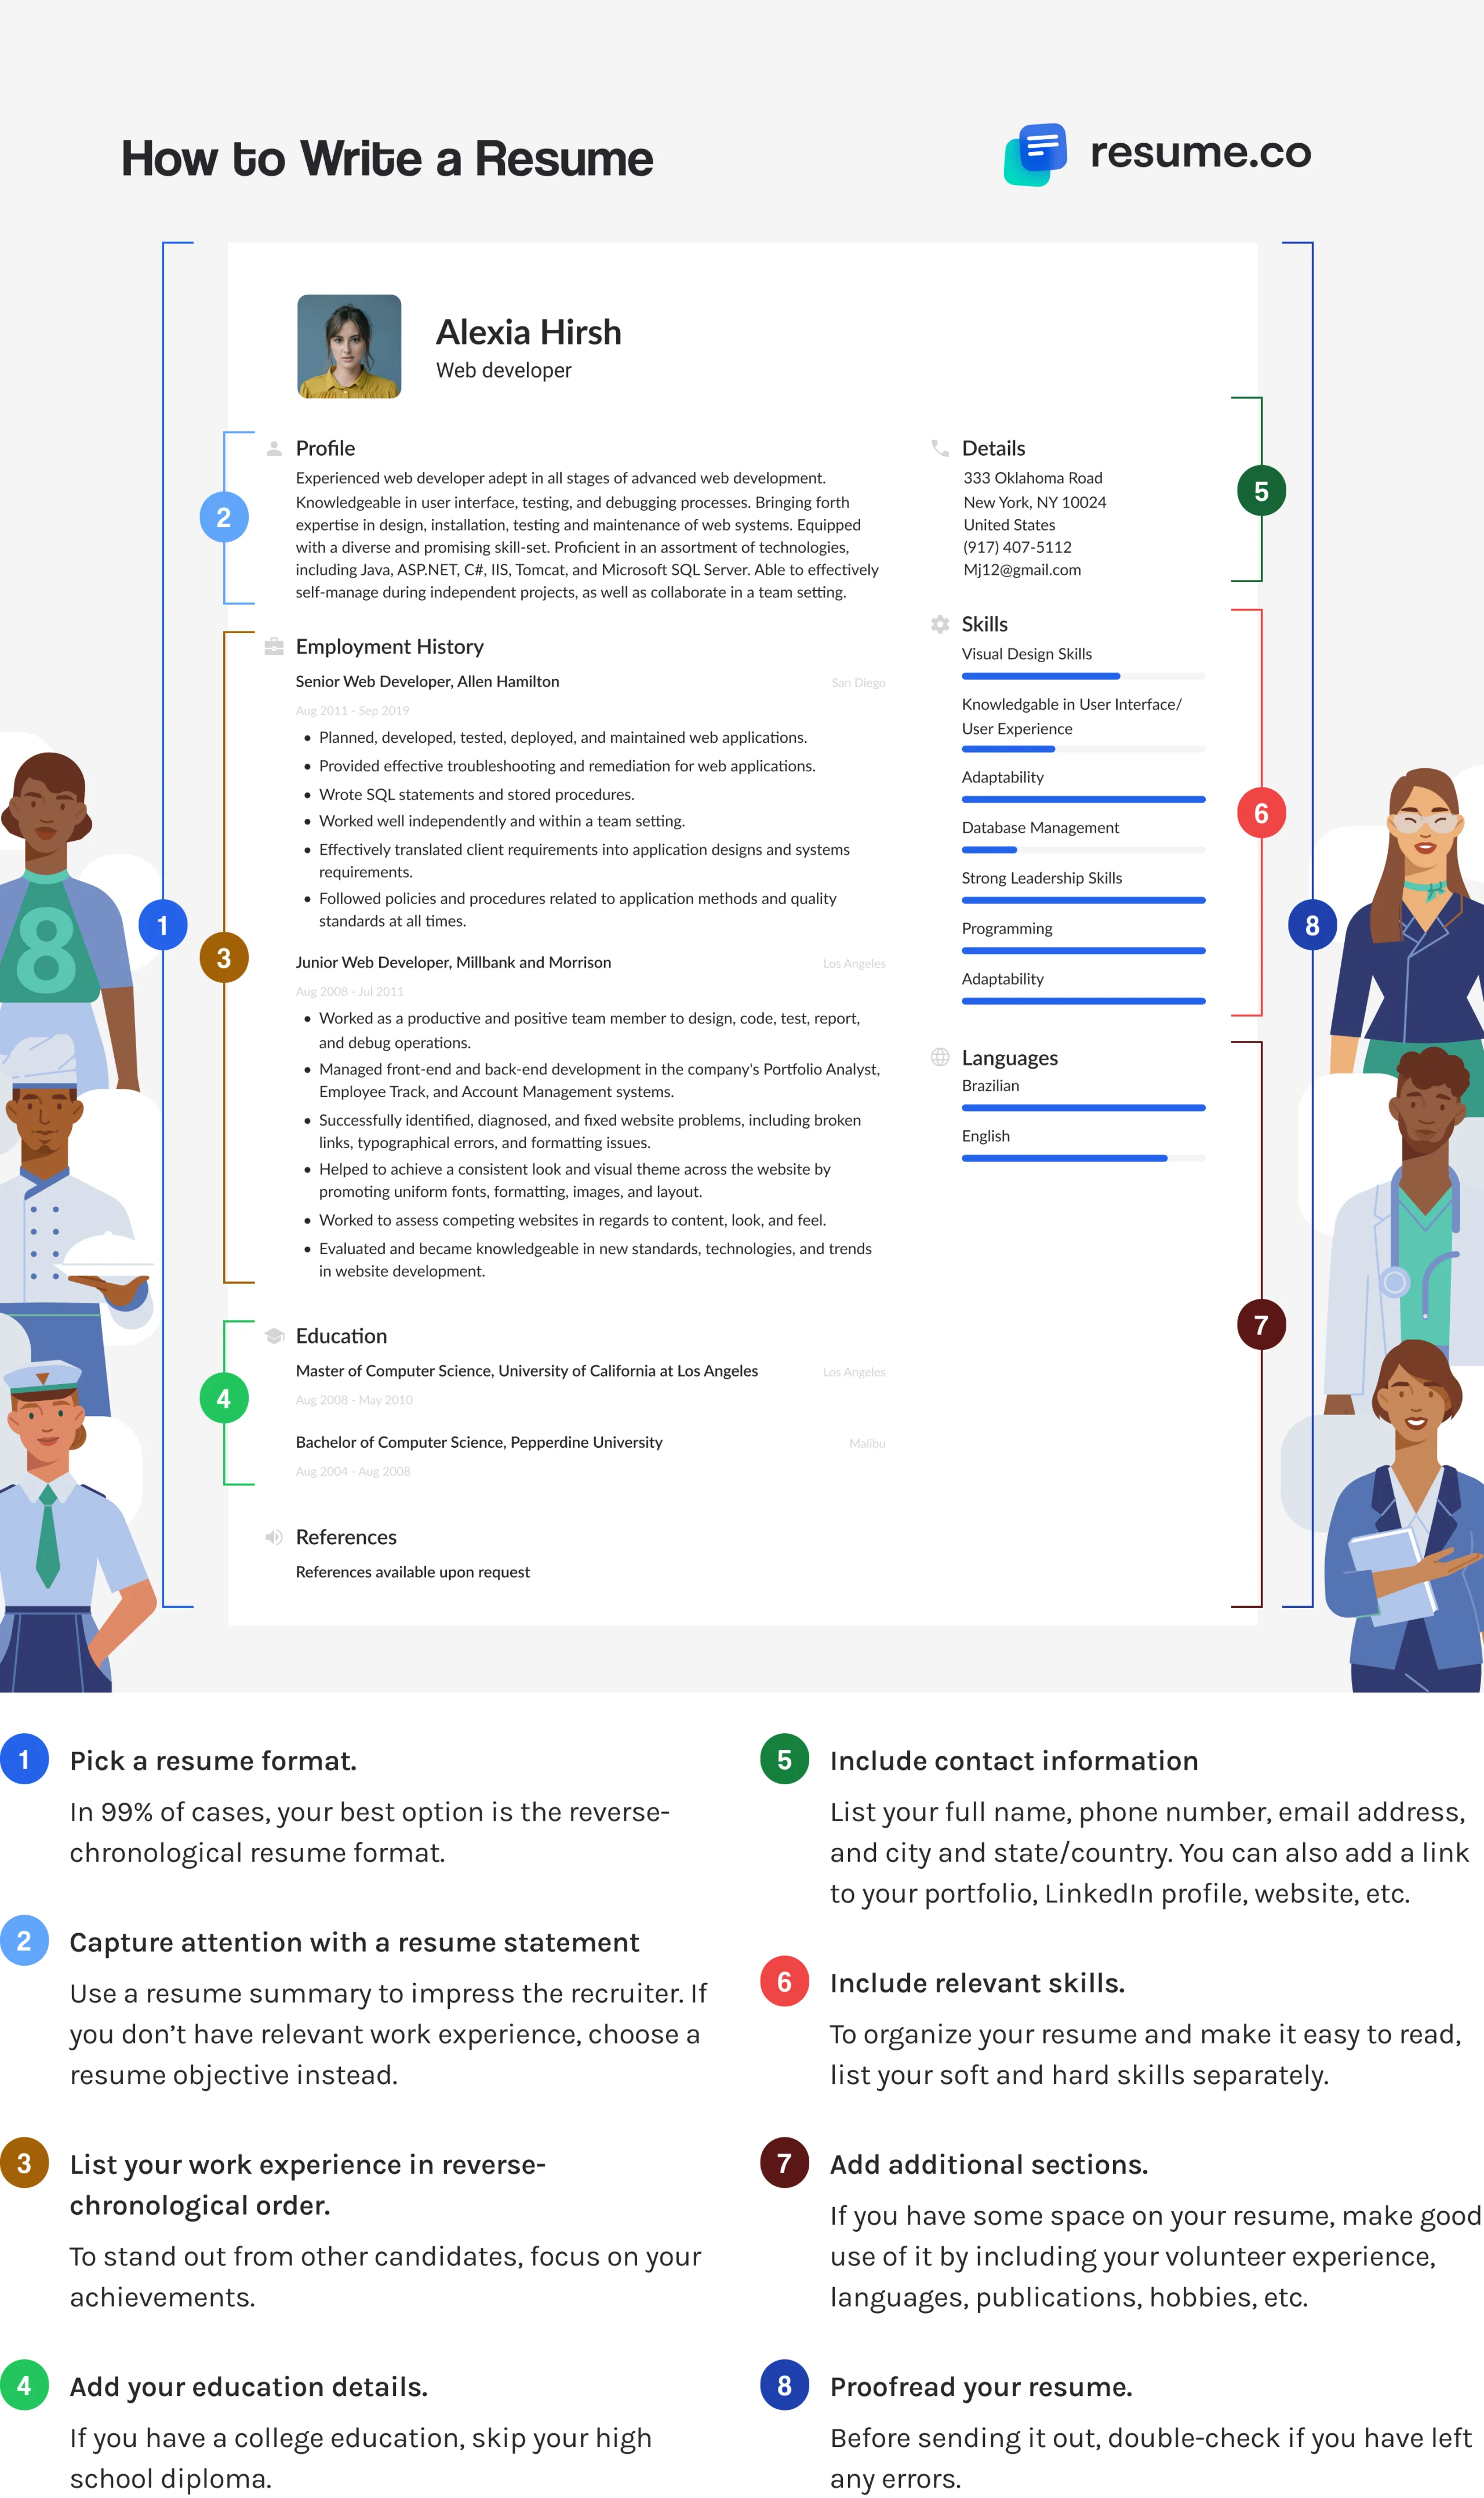 How to make a resume: step-by-step infographic